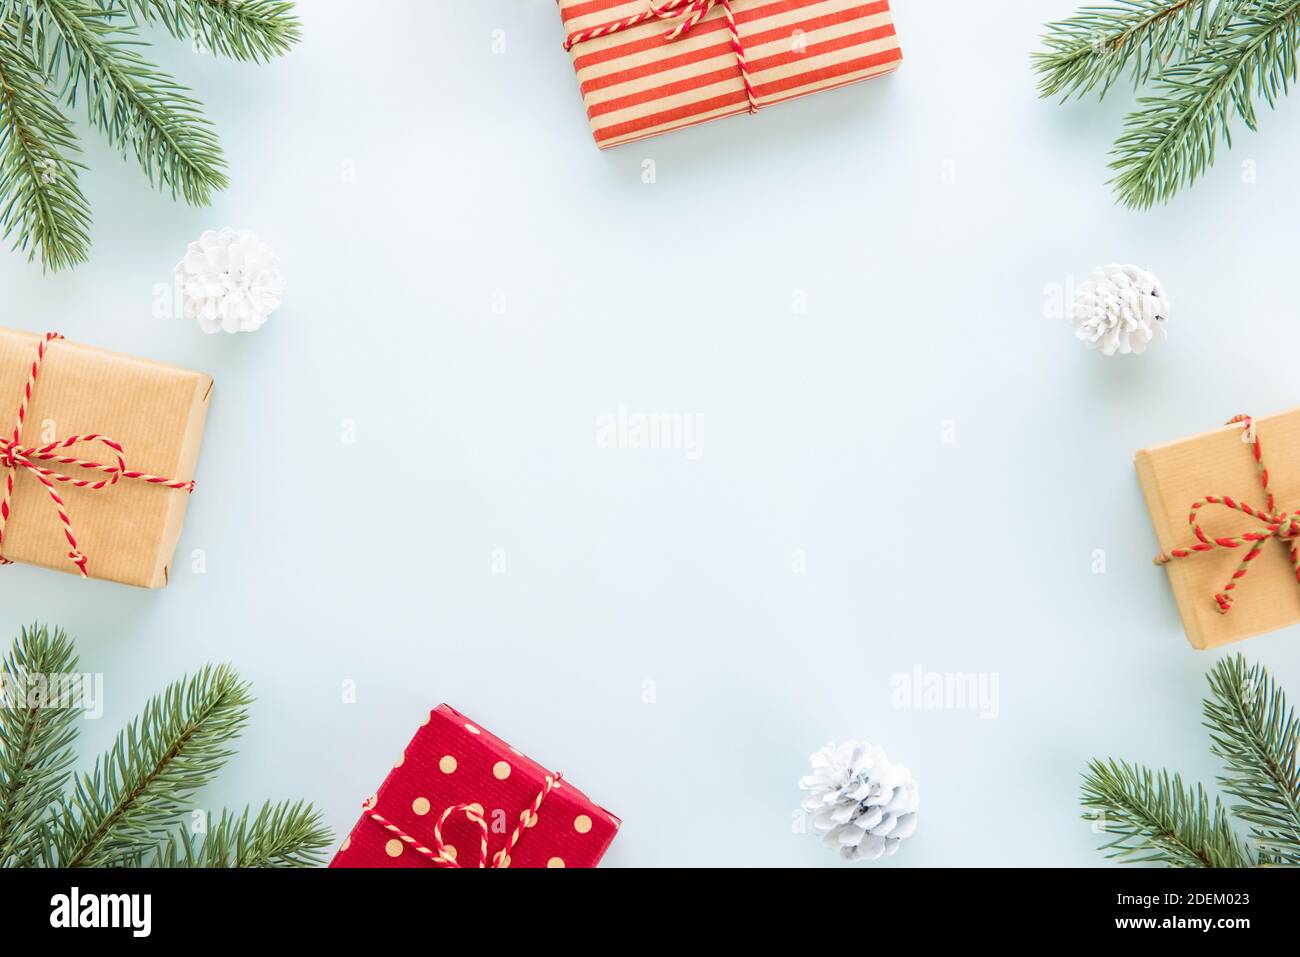 Christmas and New Year holiday background with copy space, creative idea border design with gift boxes, green pine and decorating items Stock Photo